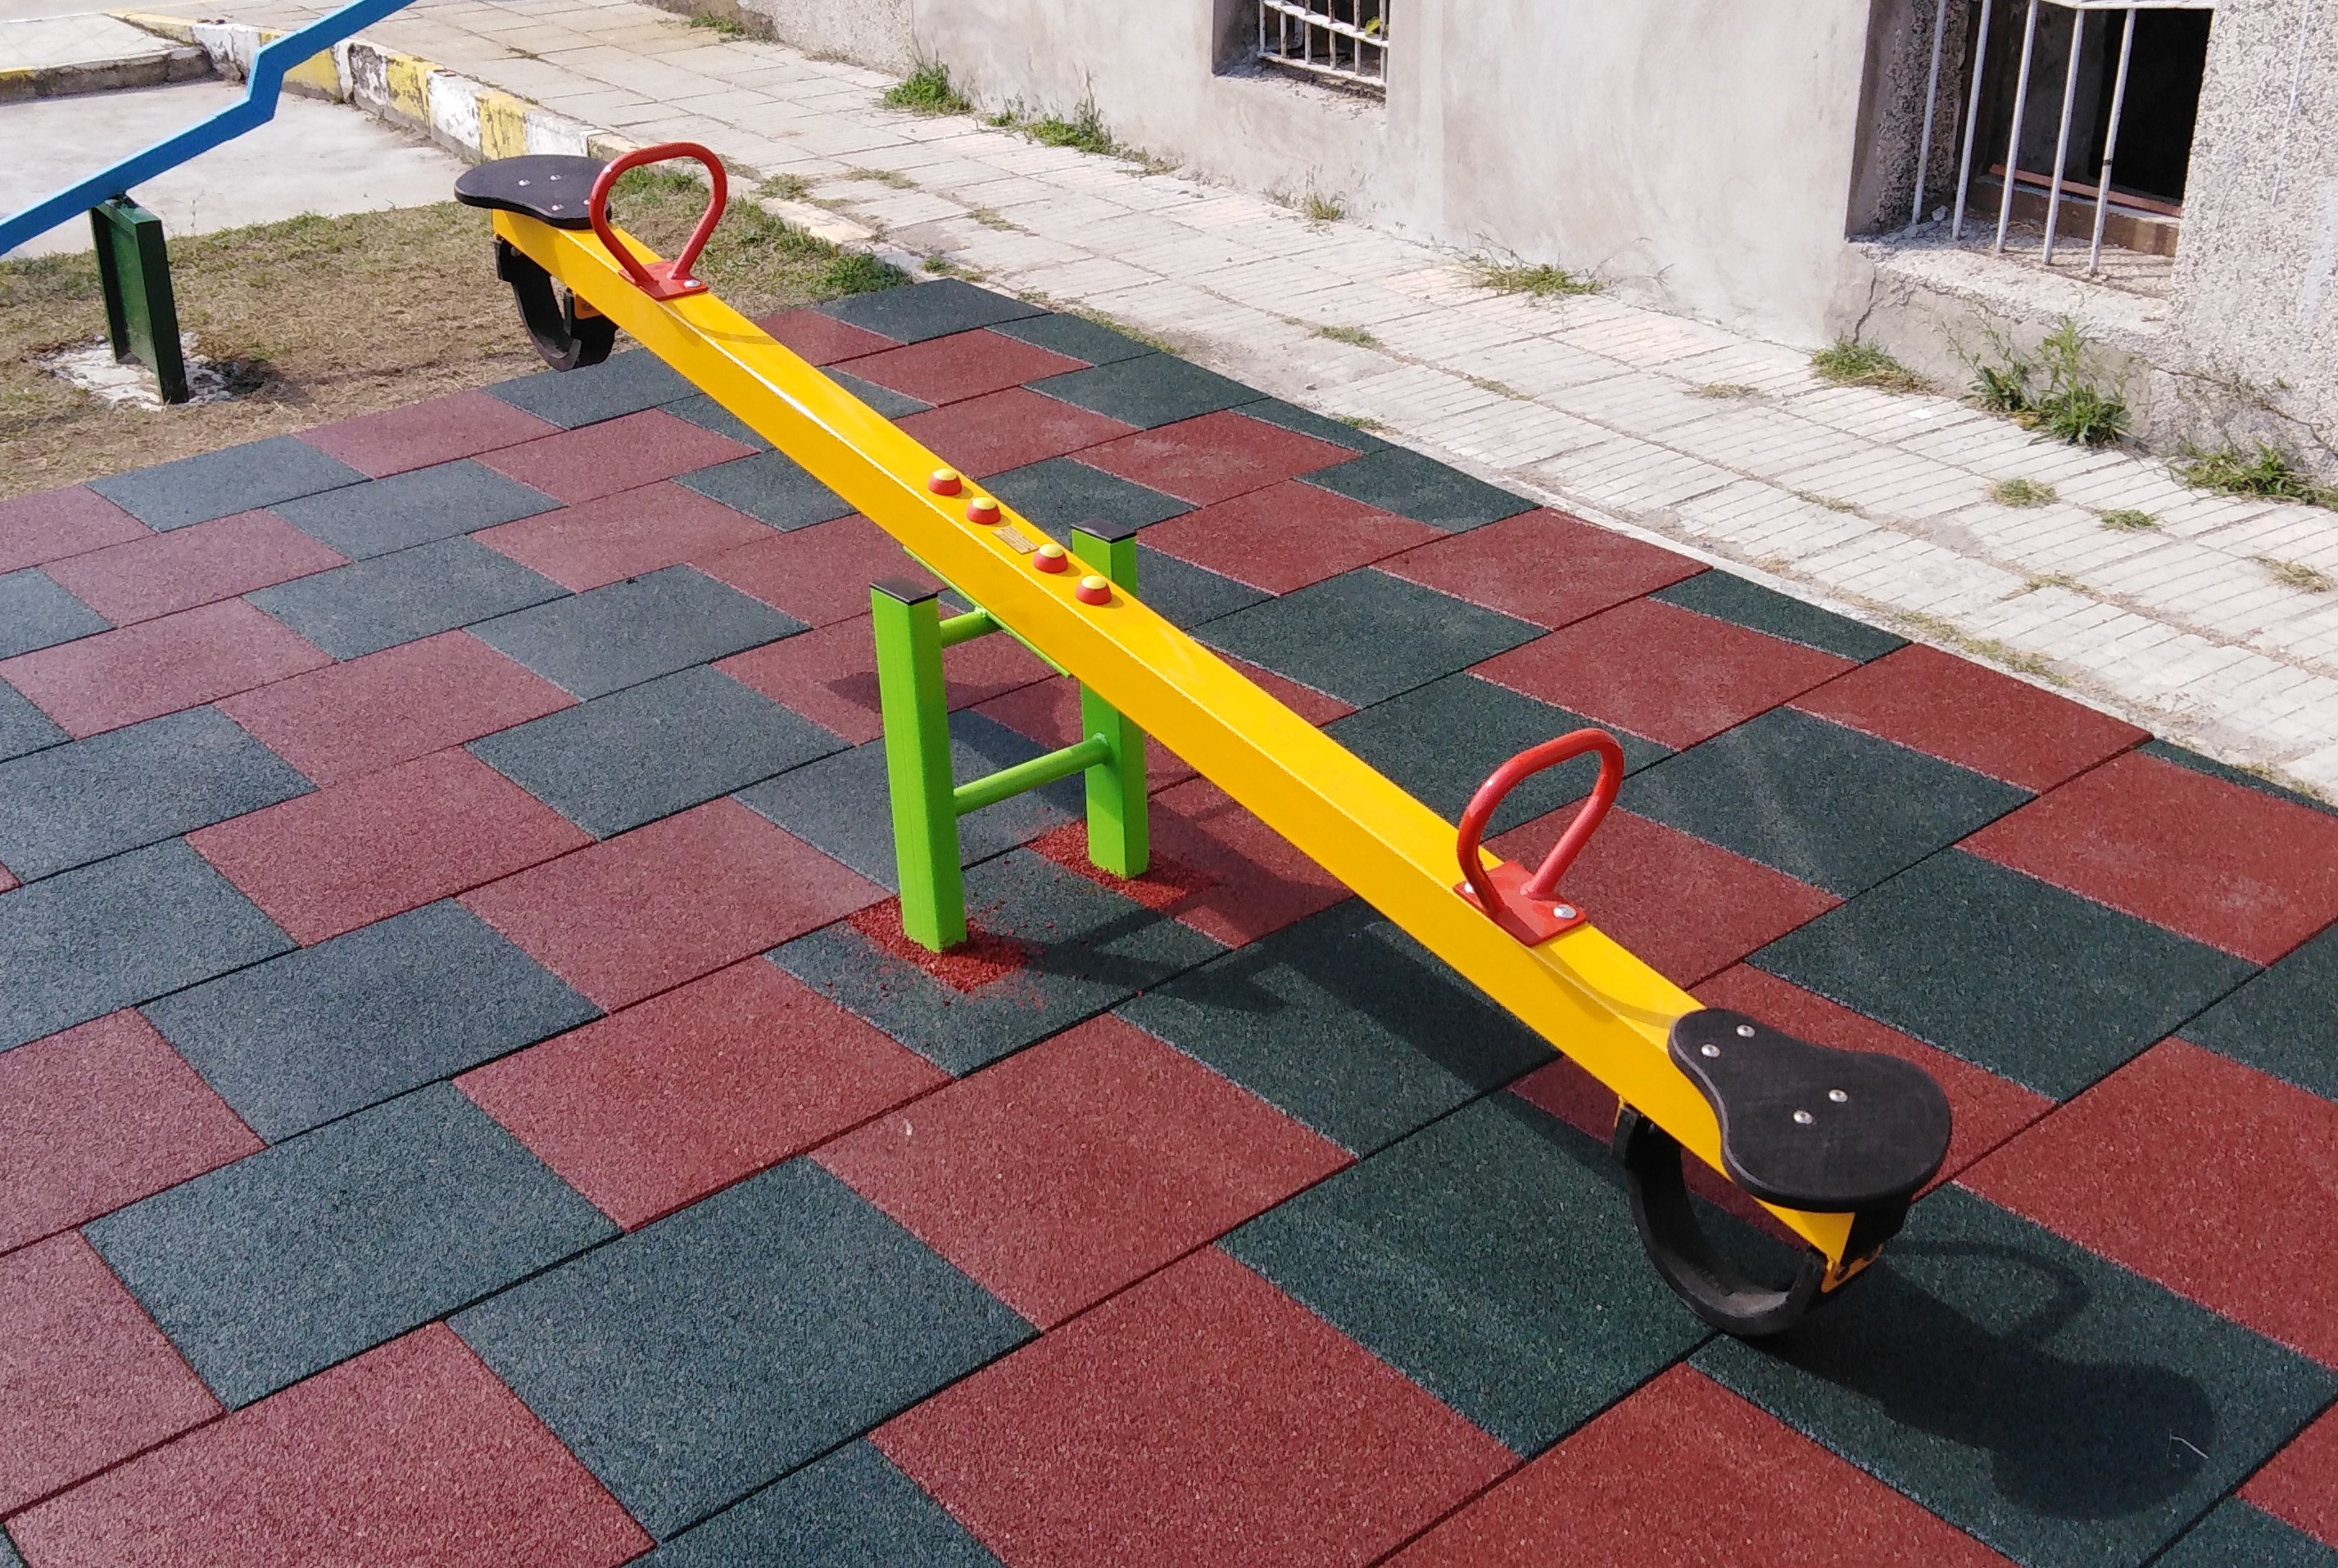 Product photo: Child swing with a metal beam, В10 model